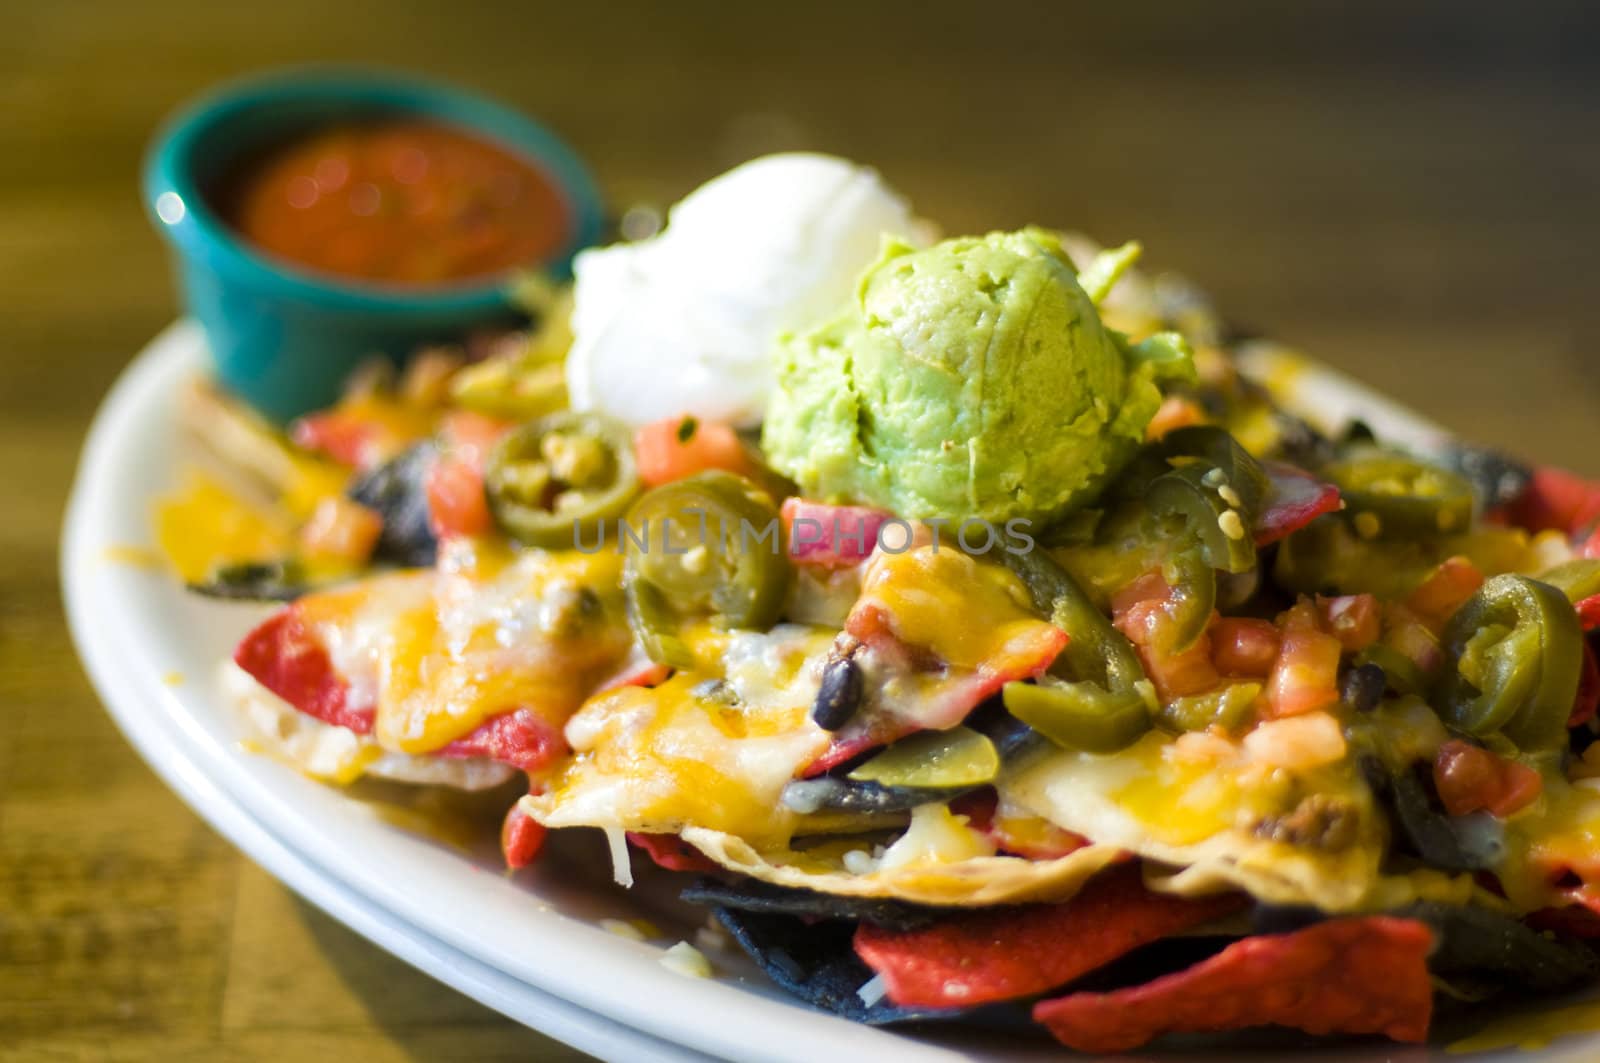 Nachos with cheese and guacamole by edan